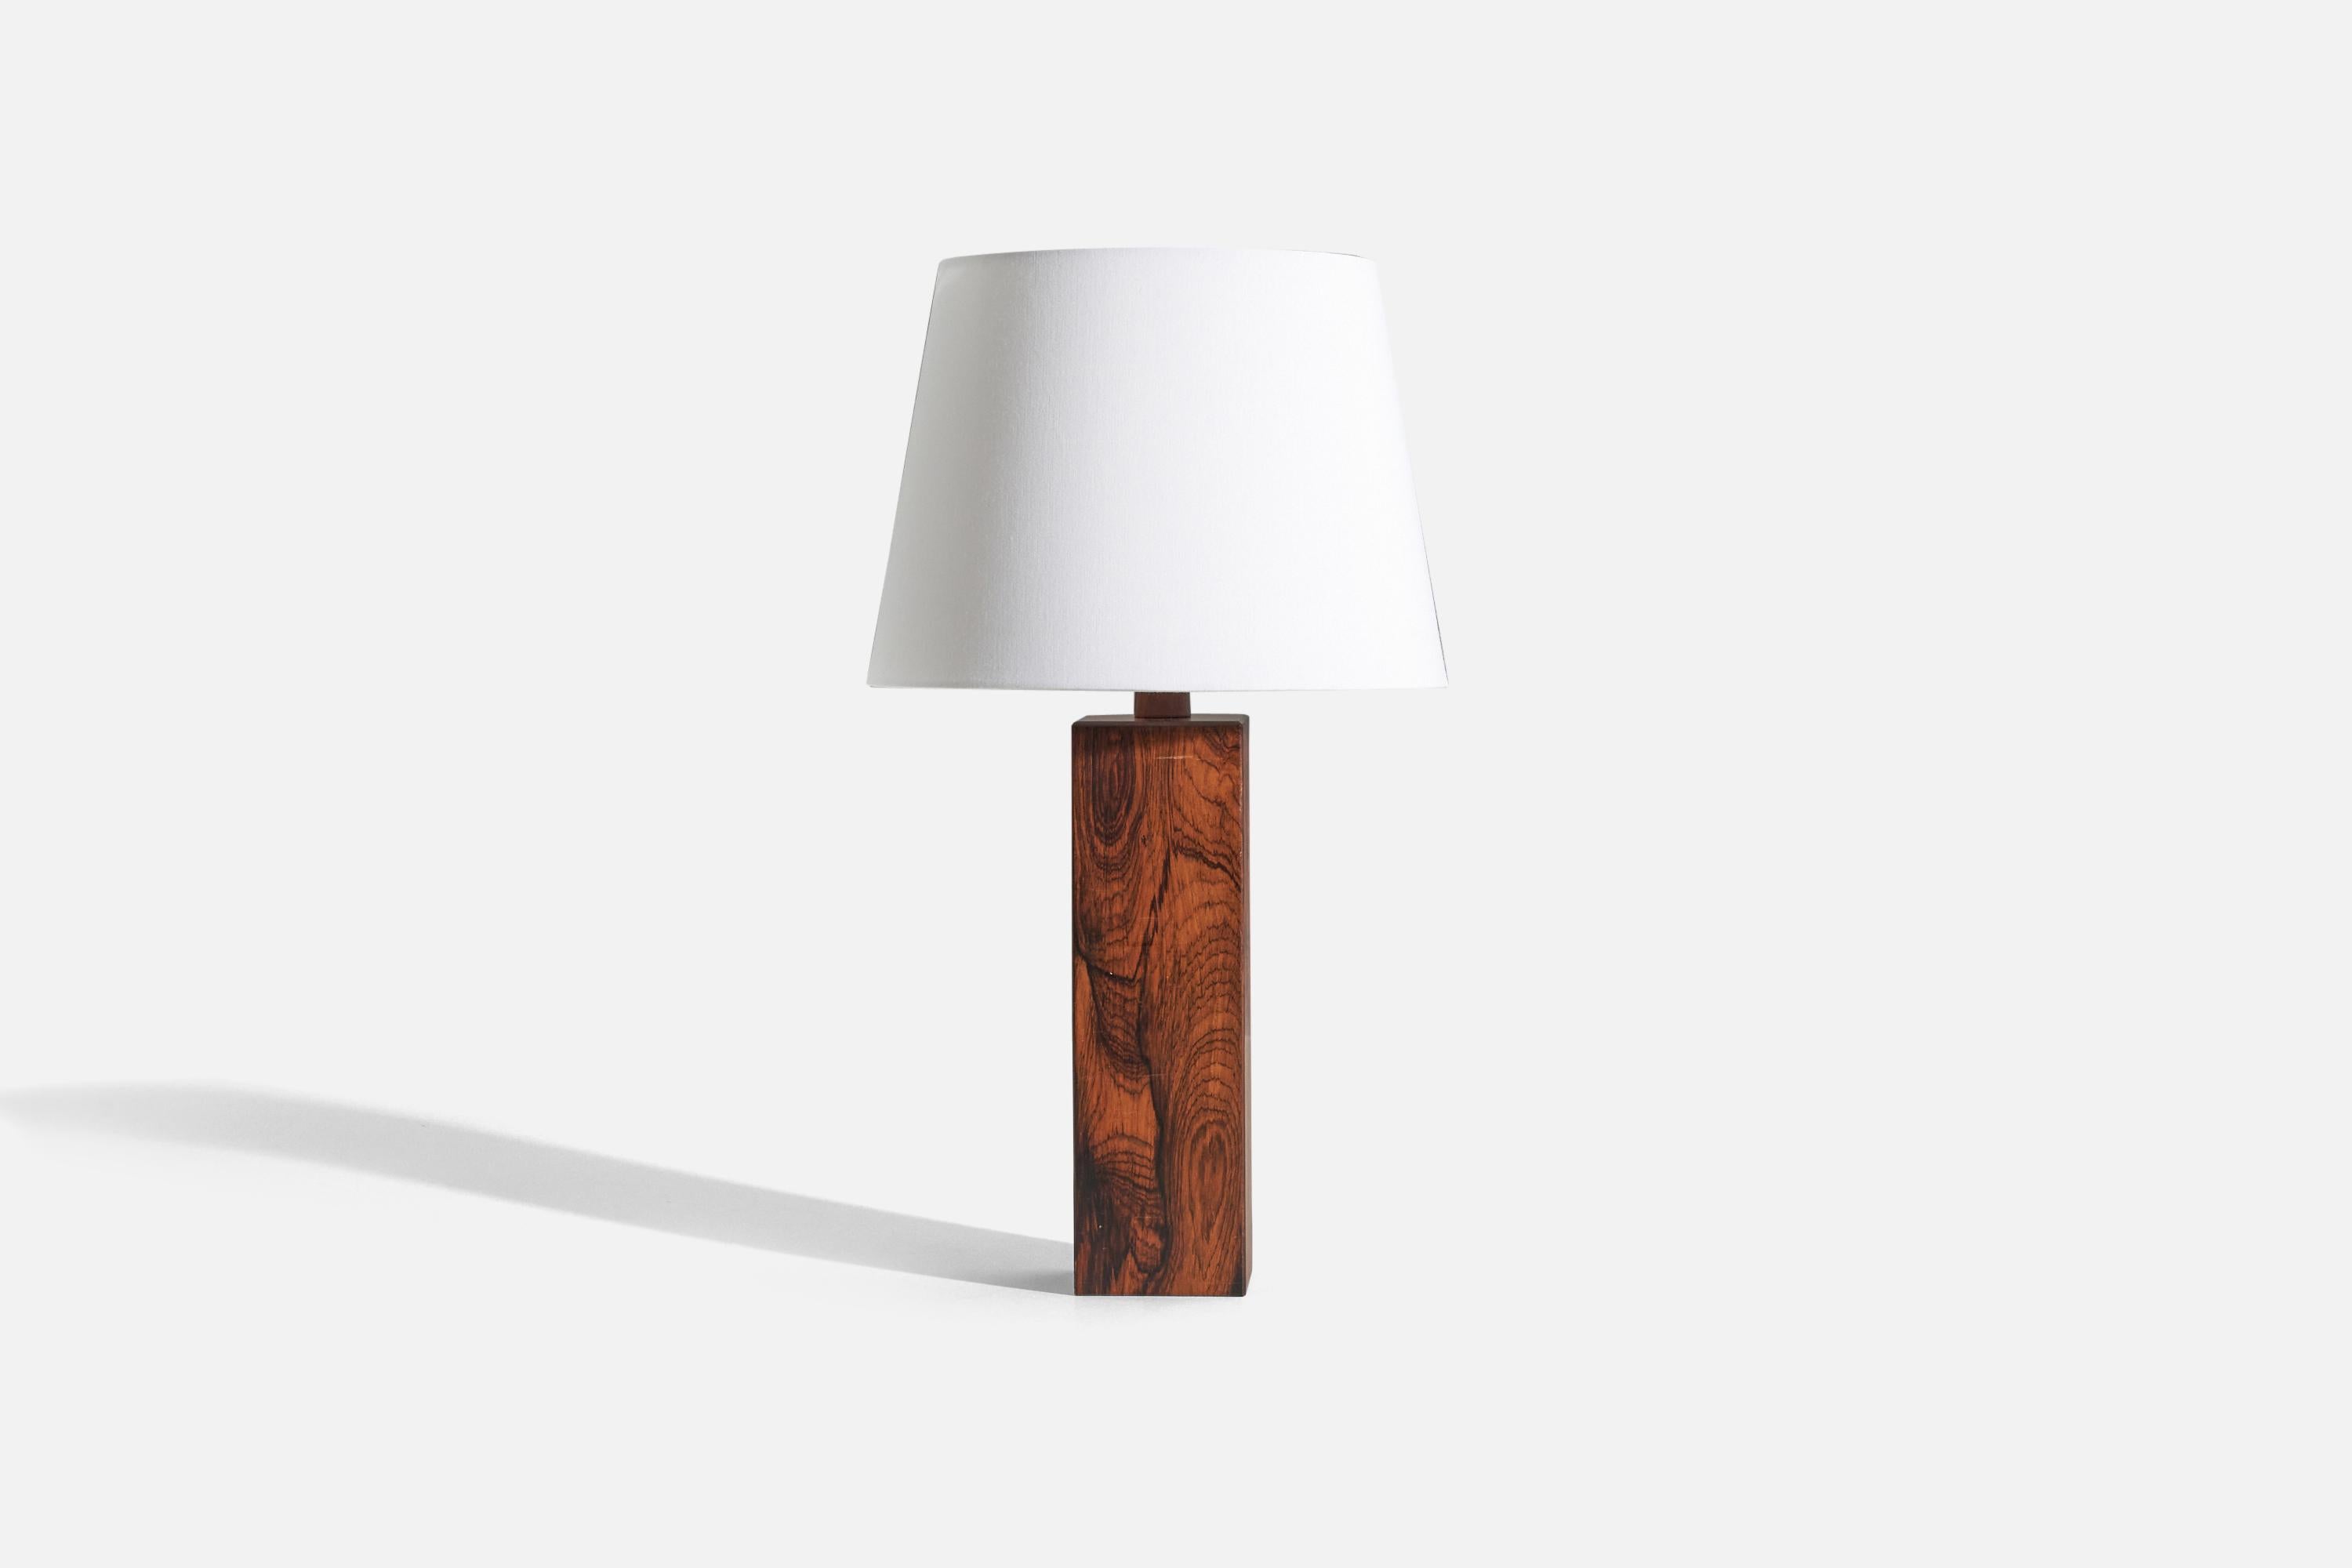 A rosewood table lamp designed and produced in Sweden, c. 1970s.

Sold without lampshade. 
Dimensions of lamp (inches) : 16.25 x 3.5 x 3.5 (H x W x D)
Dimensions of shade (inches) : 9 x 12 x 9 (T x B x H)
Dimension of lamp with shade (inches) :